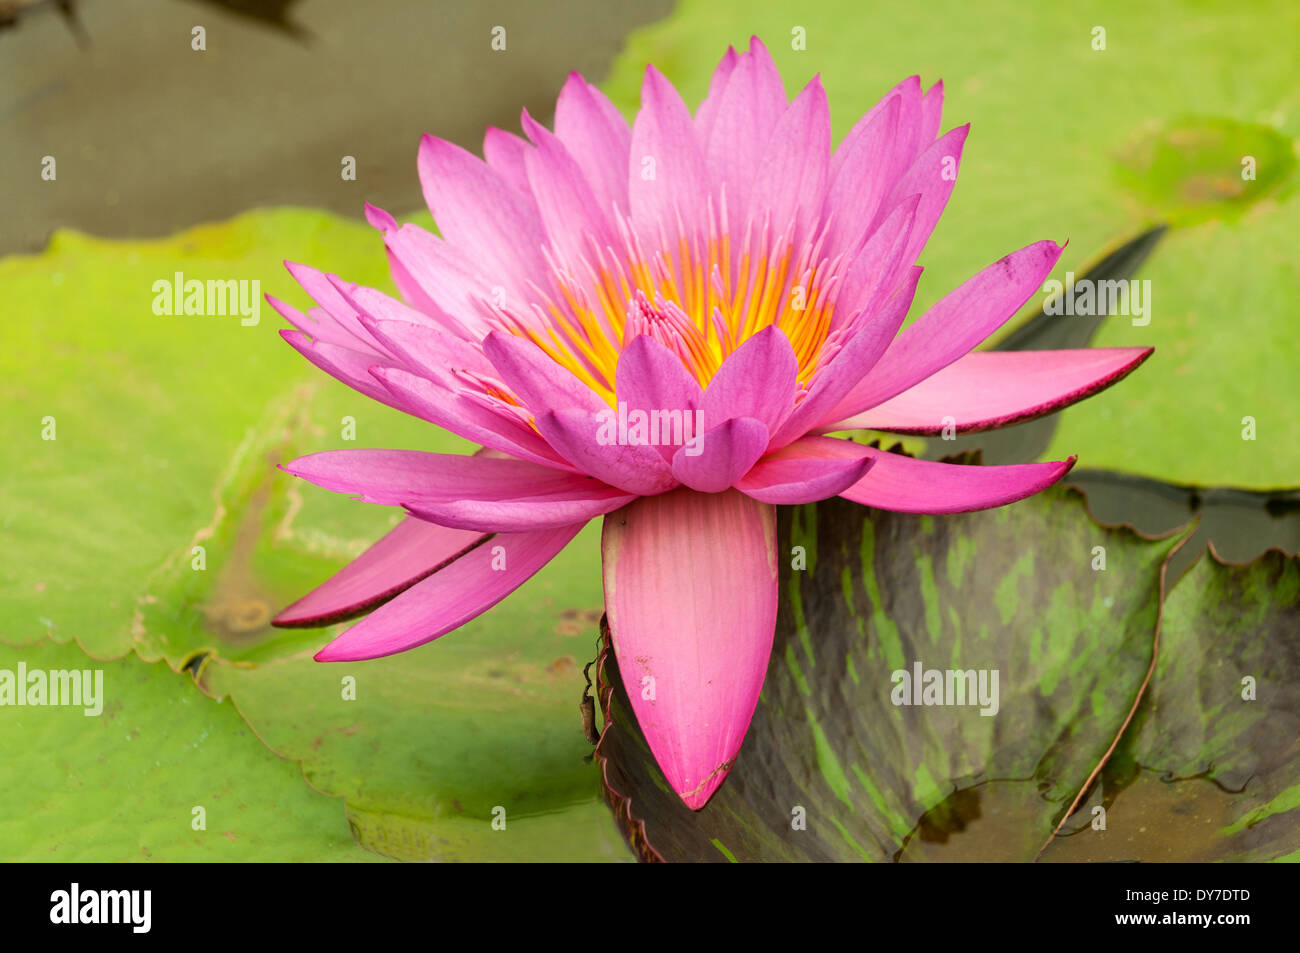 Nymphaea Edie's Choice, Pink Tropical Water Lily Stock Photo